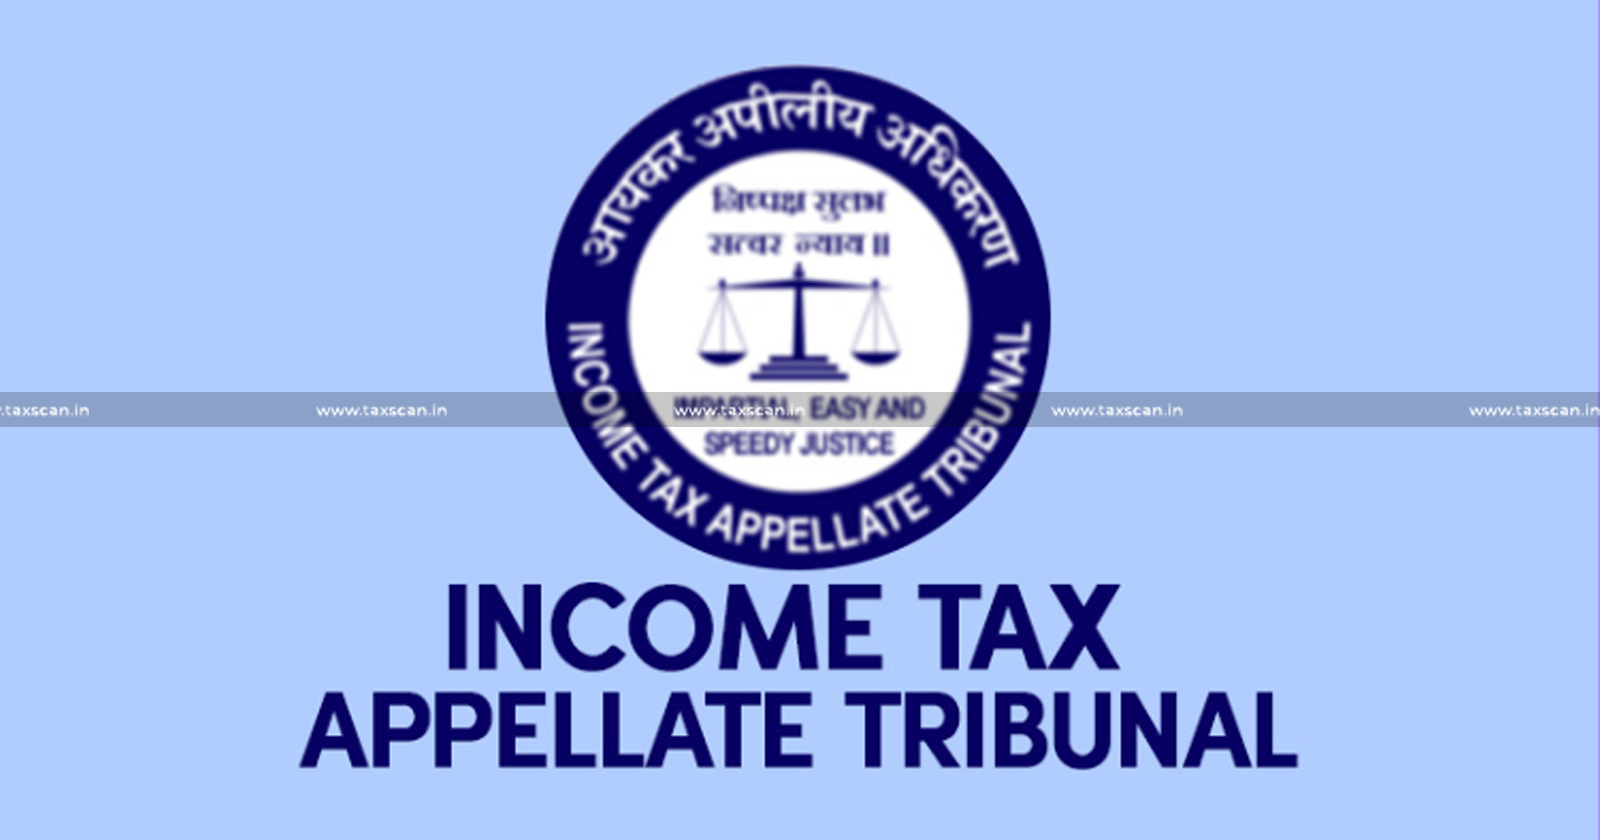 Accommodation - Entries - ITAT - Addition - Bogus - Purchase - Dummy - Company - income - tax - appellate - tribunal - TAXSCAN